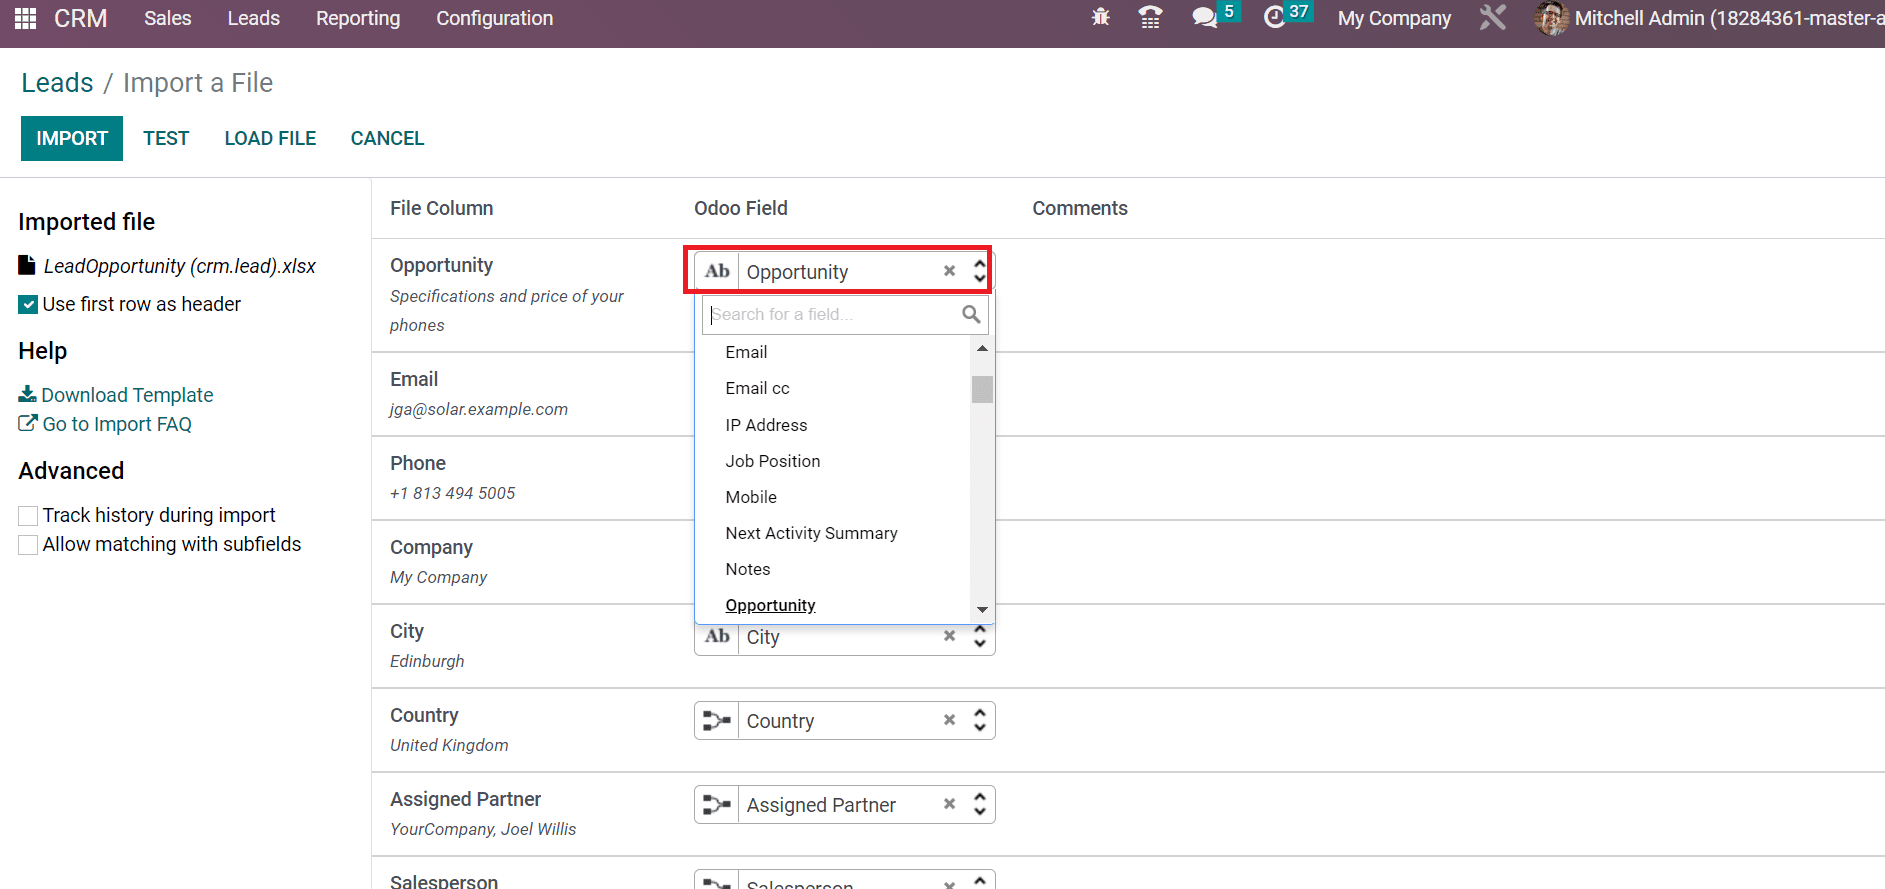 how-to-import-leads-with-the-help-of-odoo-16-crm-9